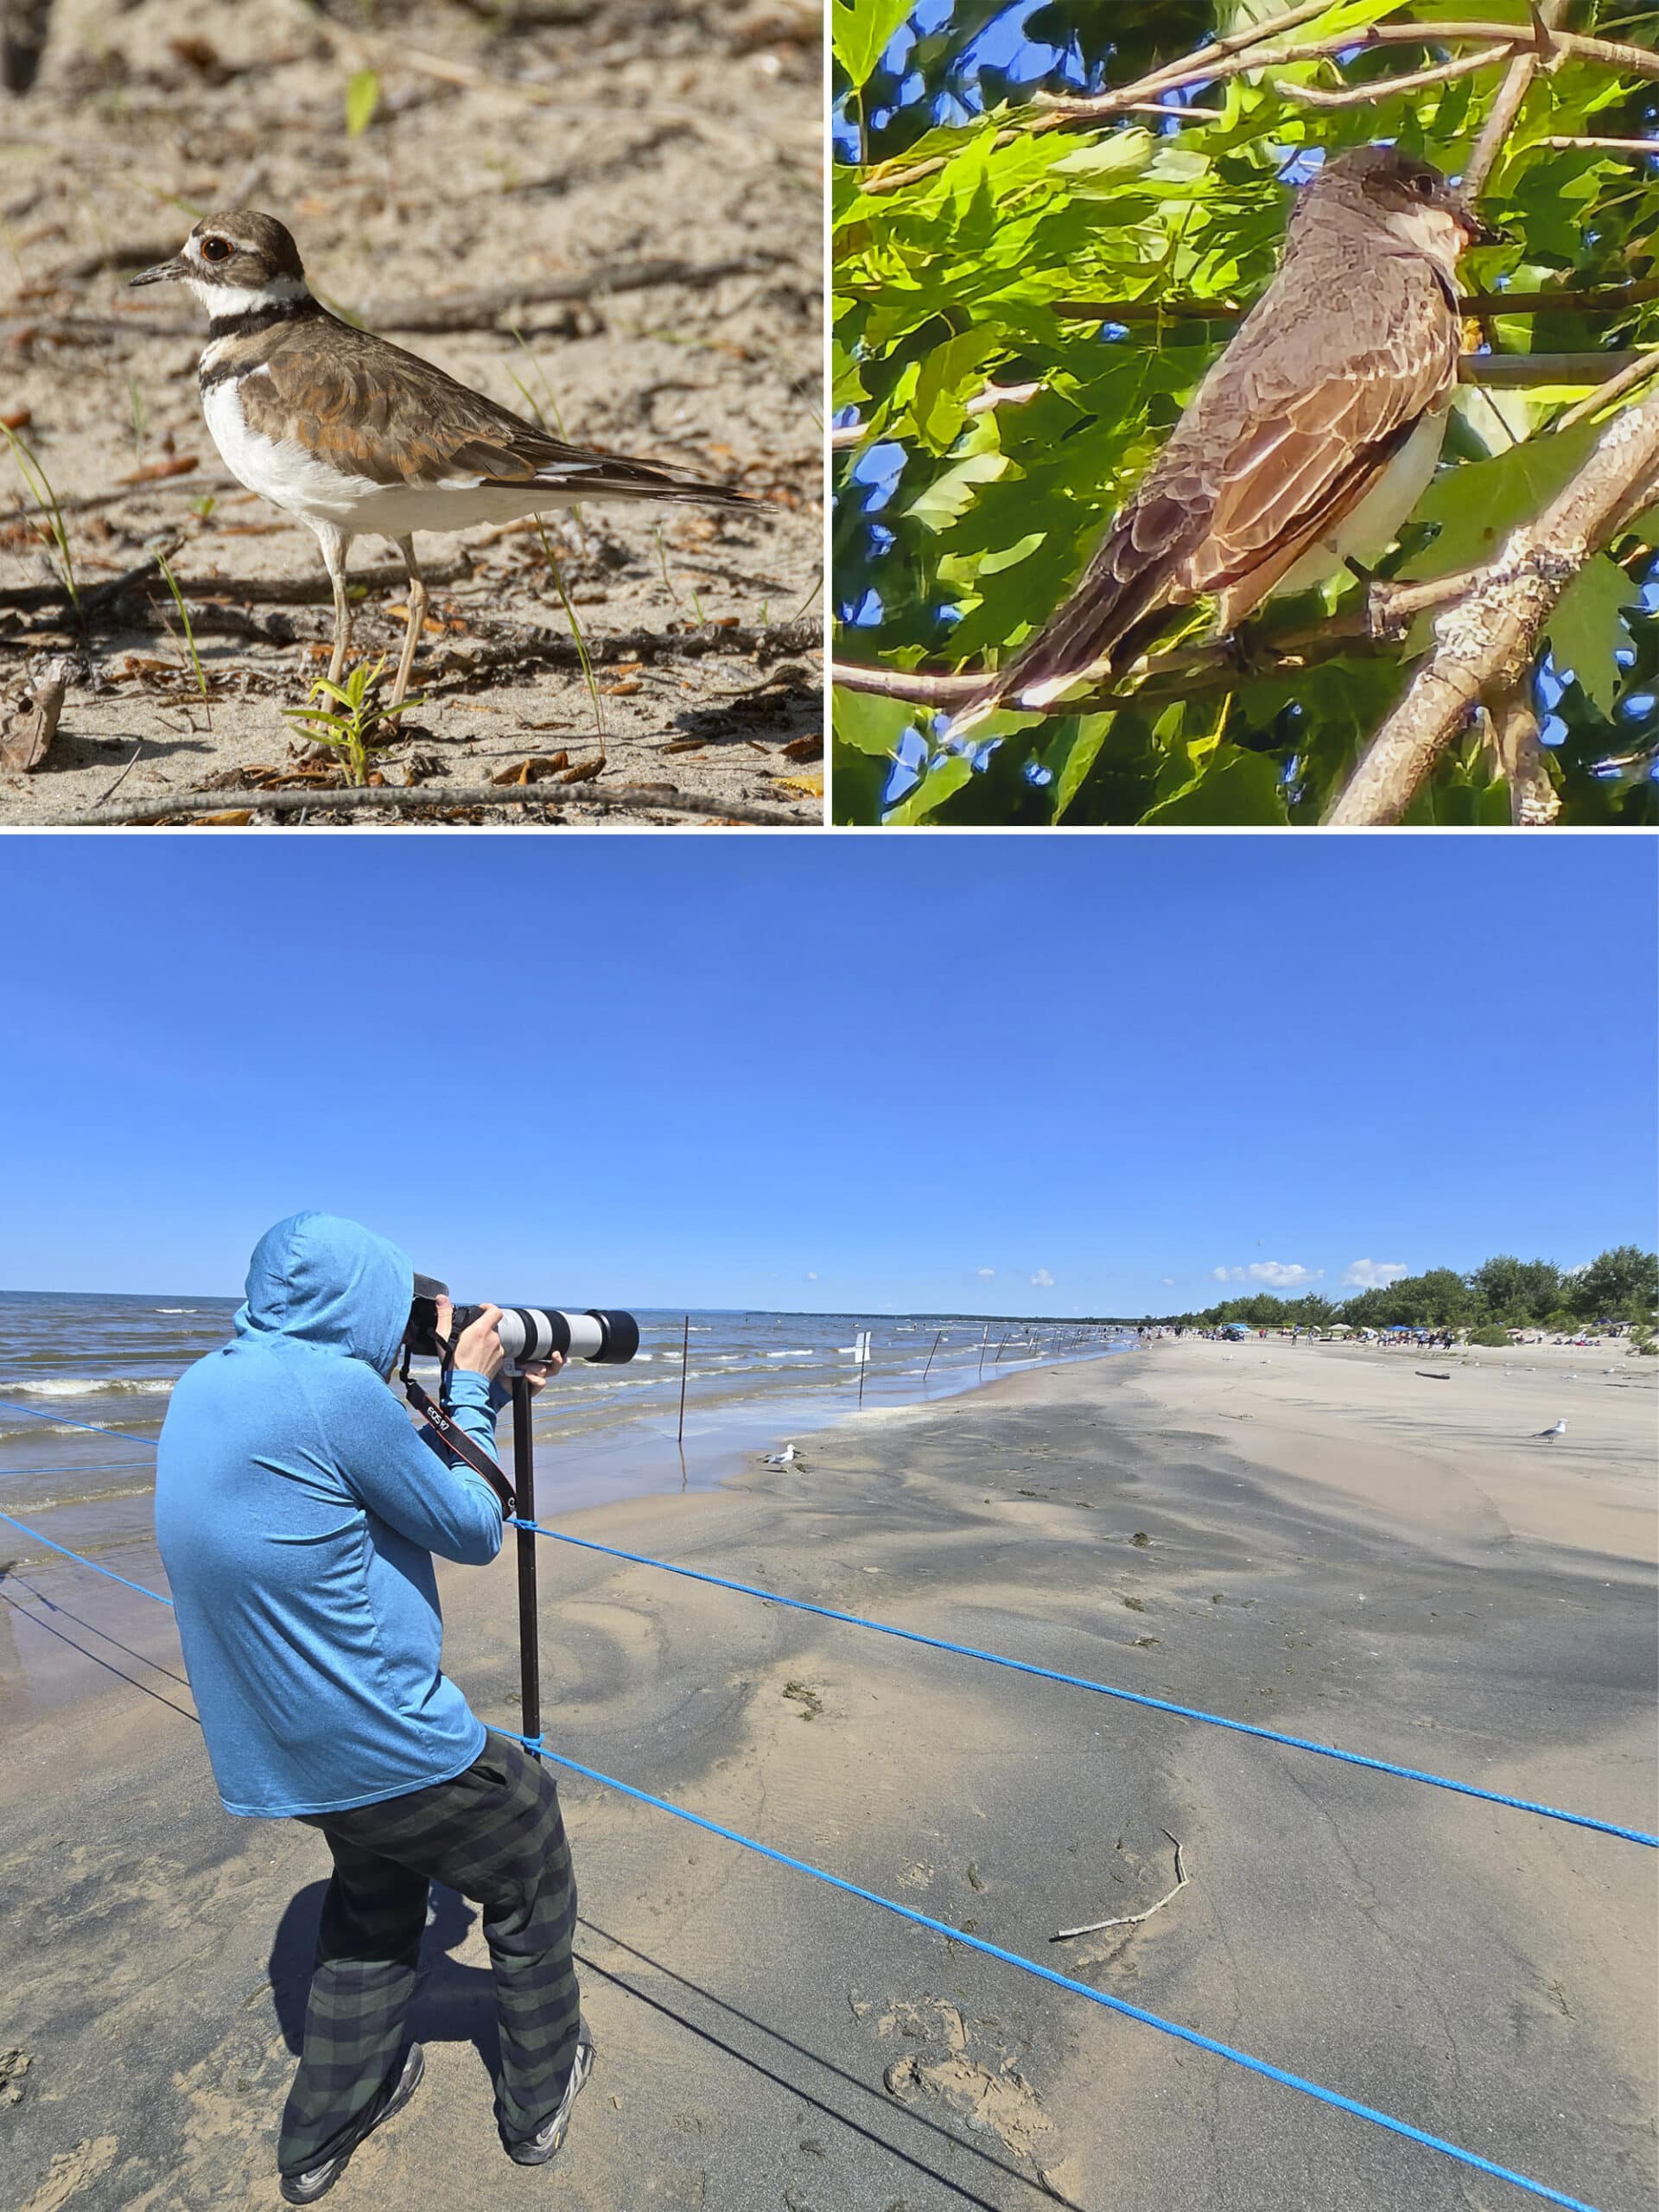 3 part image showing a Killdeer, a Gray Kingbird, and the author’s husband photographing piping plovers.